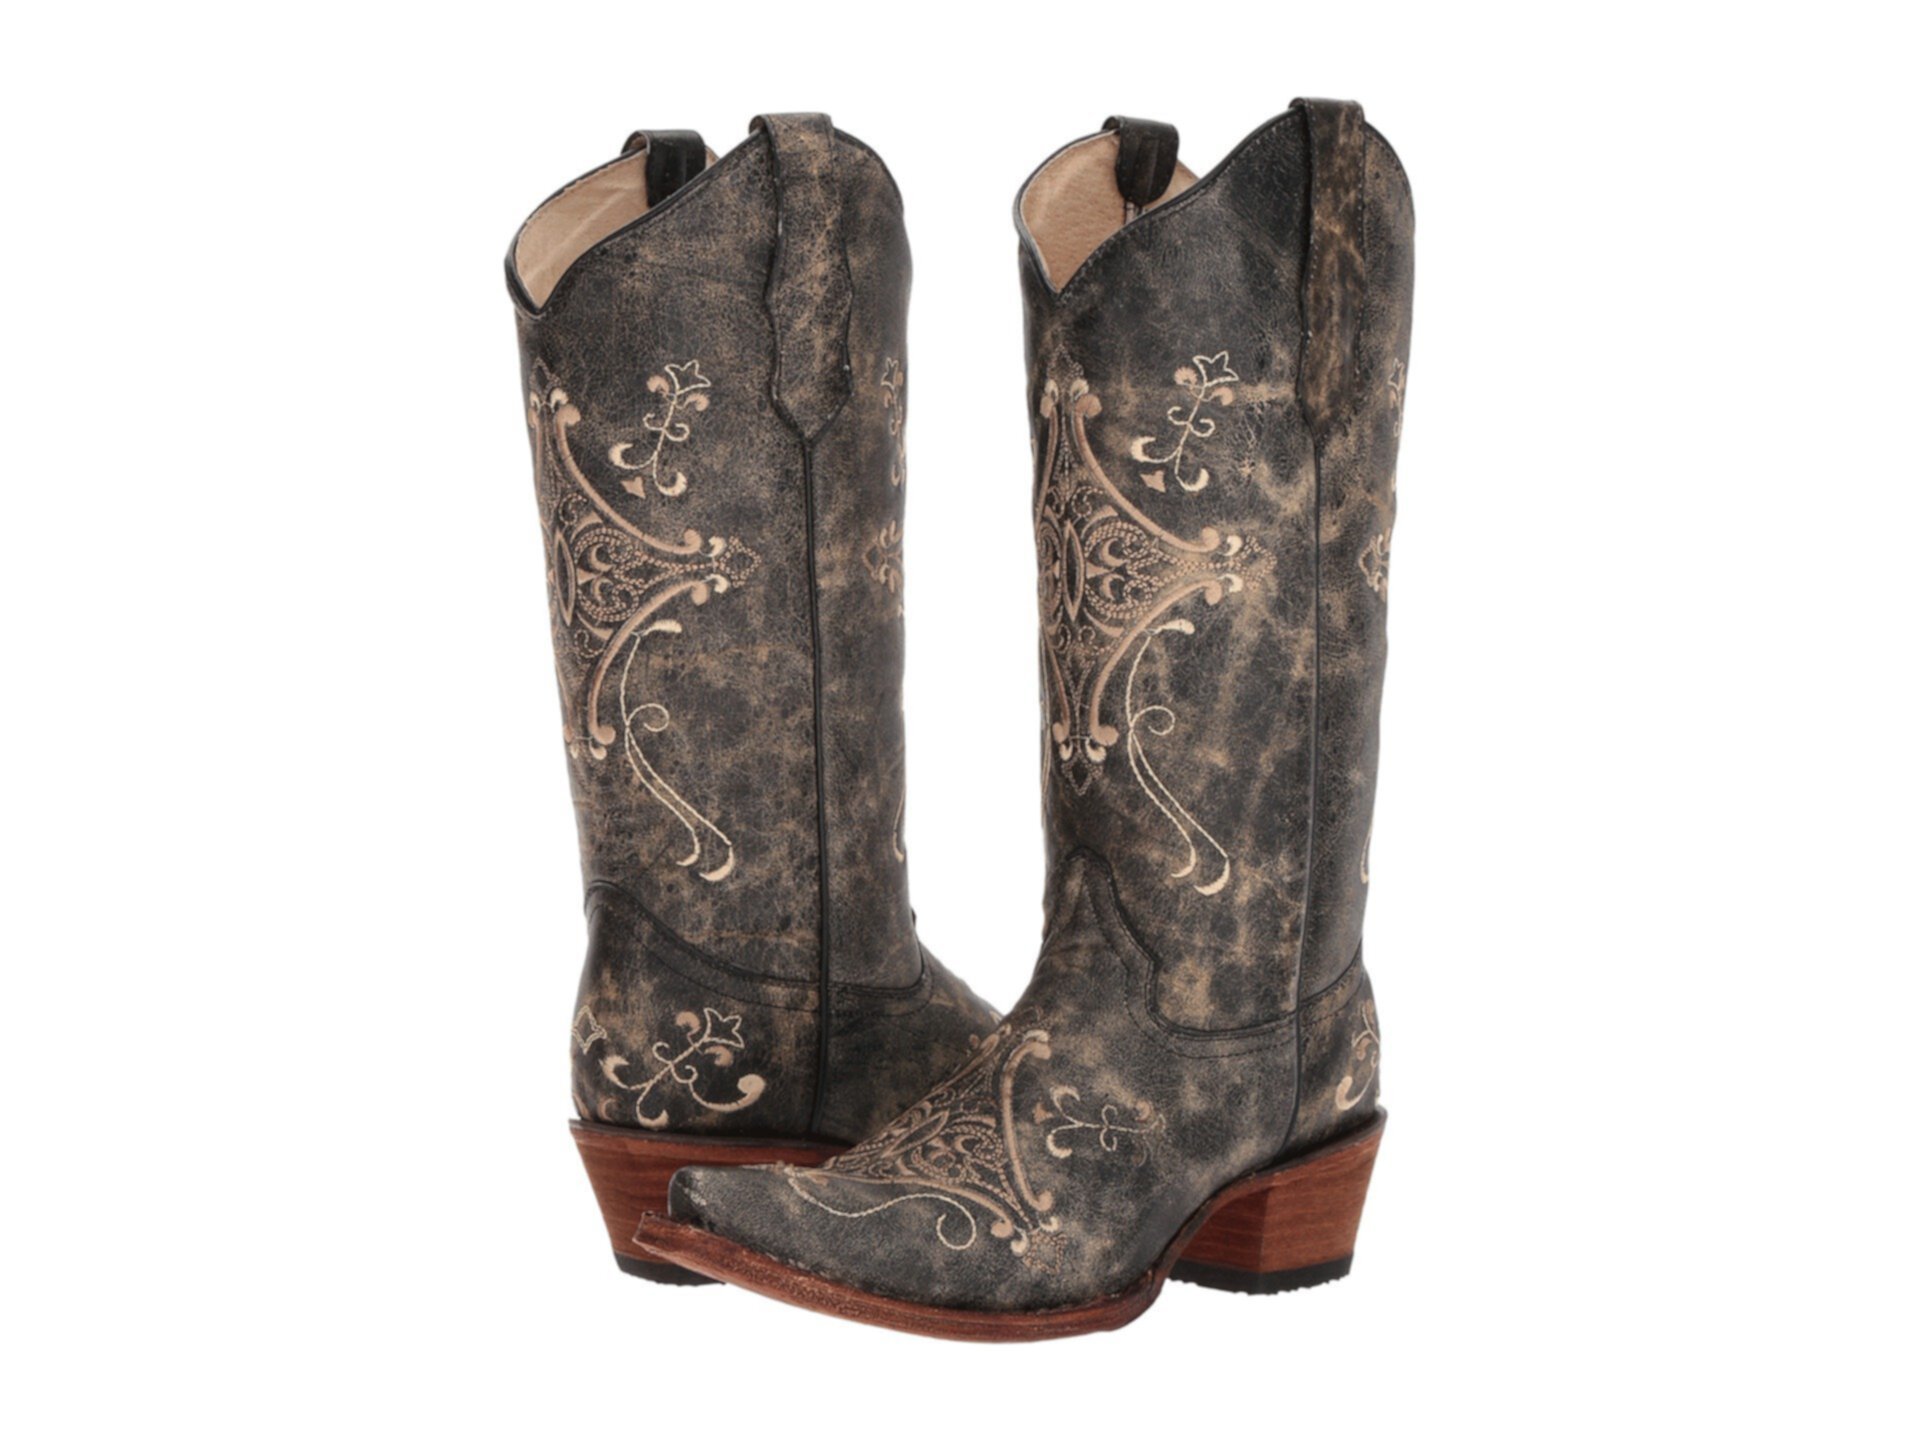 L5048 Corral Boots